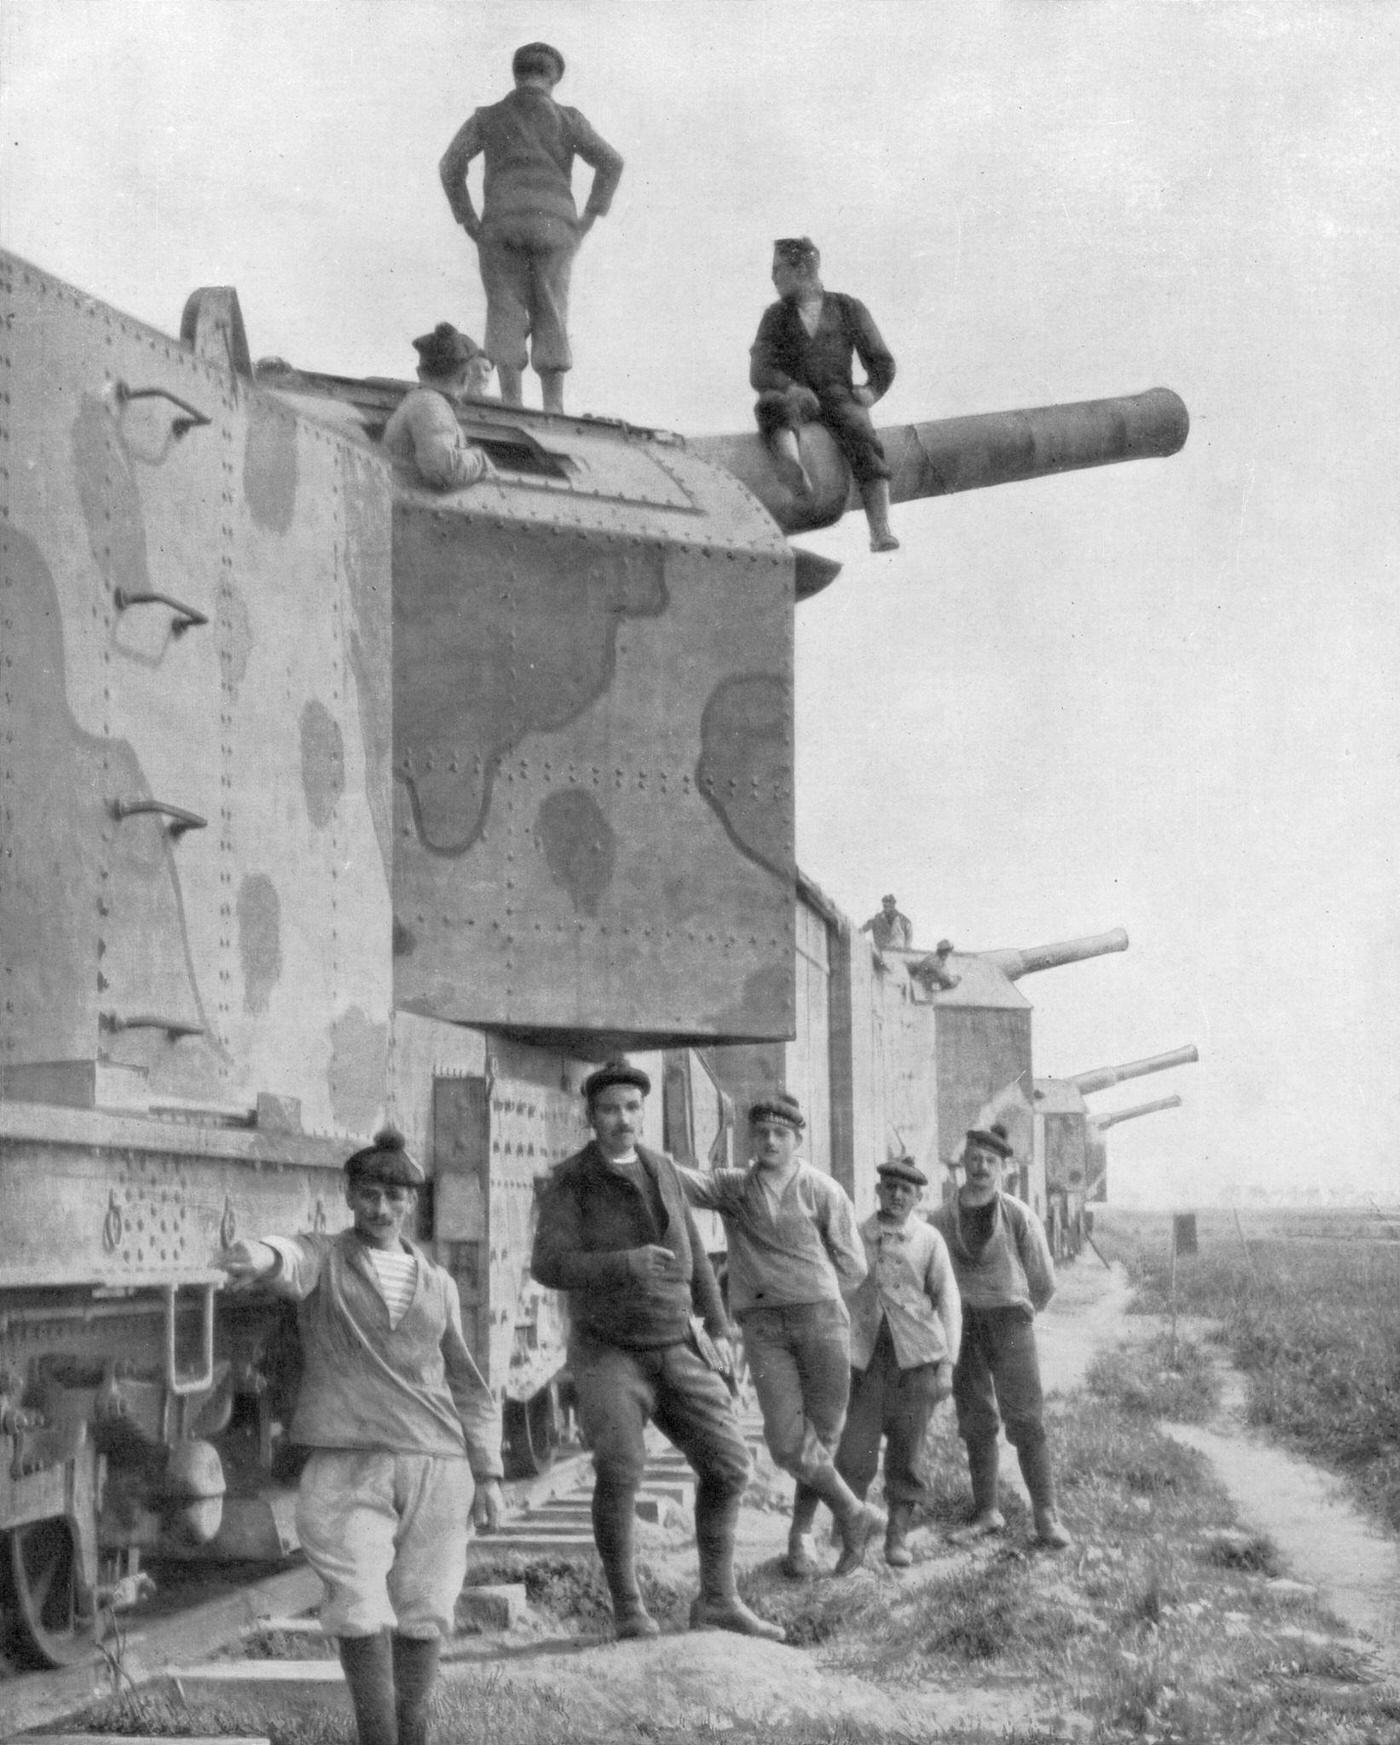 An armored train battery, 1918.